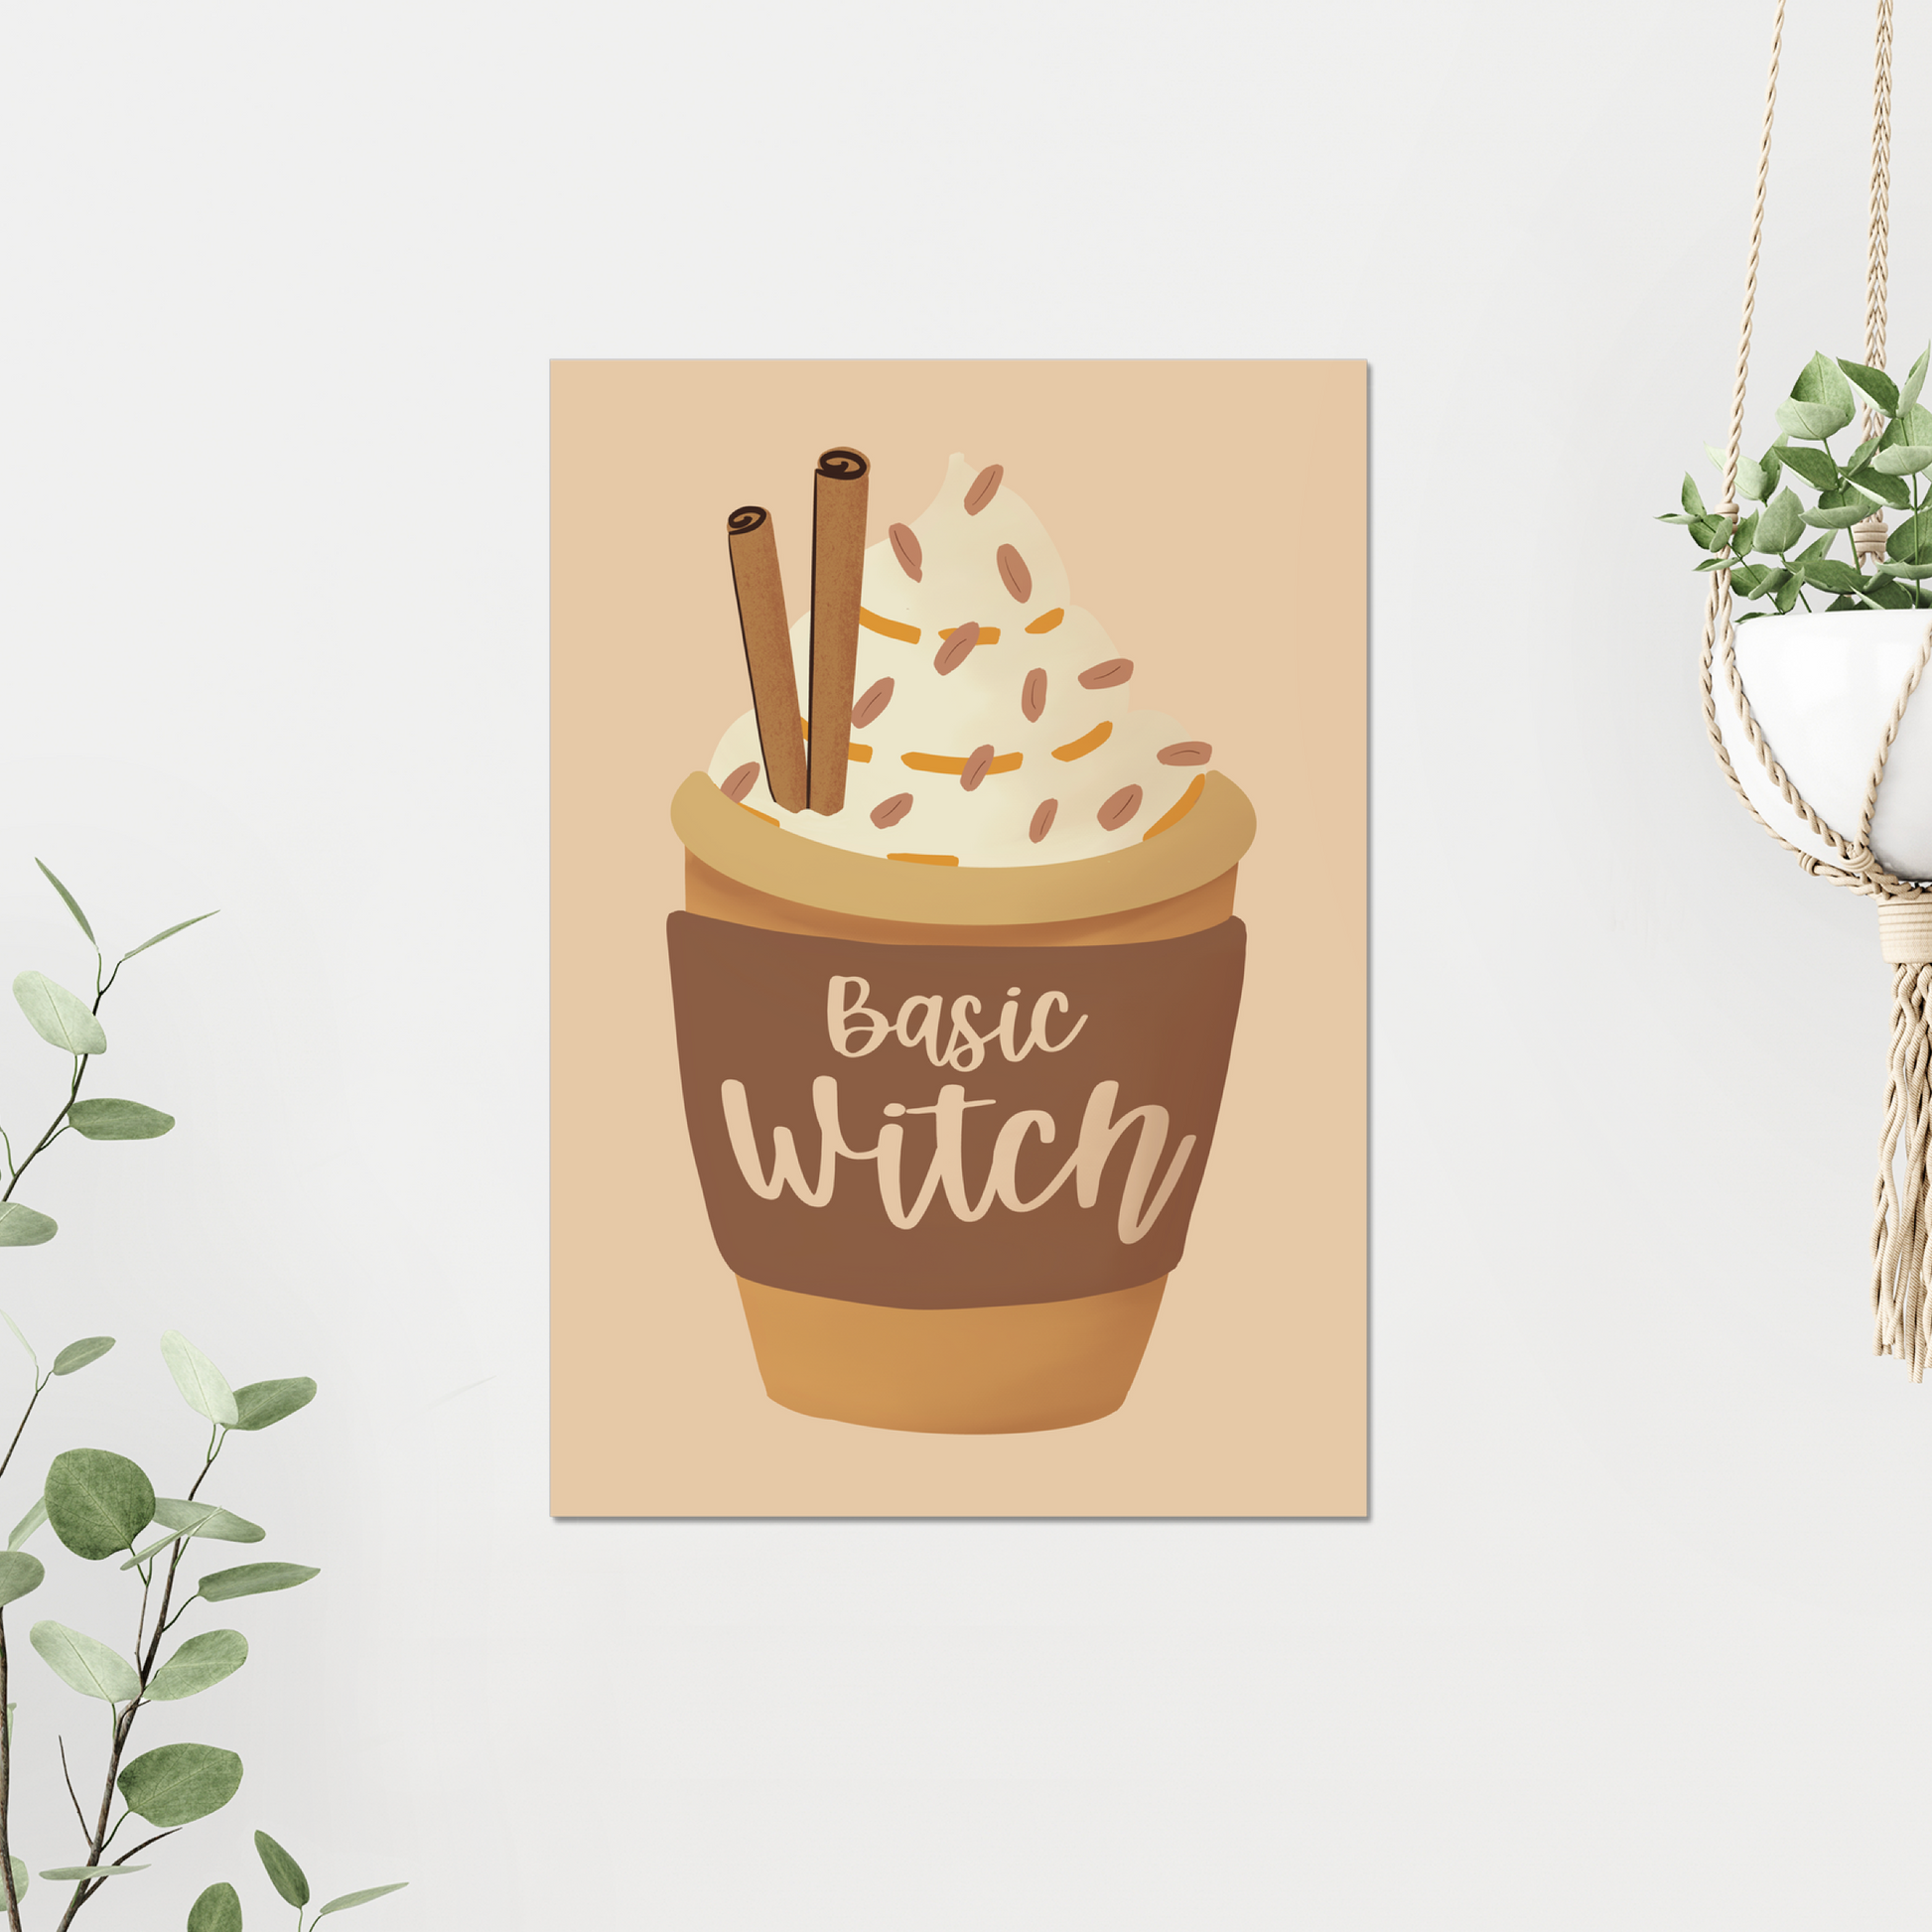 This basic b*tch loves pumpkin spice lattes, so we've got the perfect print for fans of this seasonal drink! Our Basic Witch Latte Art Print features a fun twist on a classic latte. Grab one today to add some sass to your house!